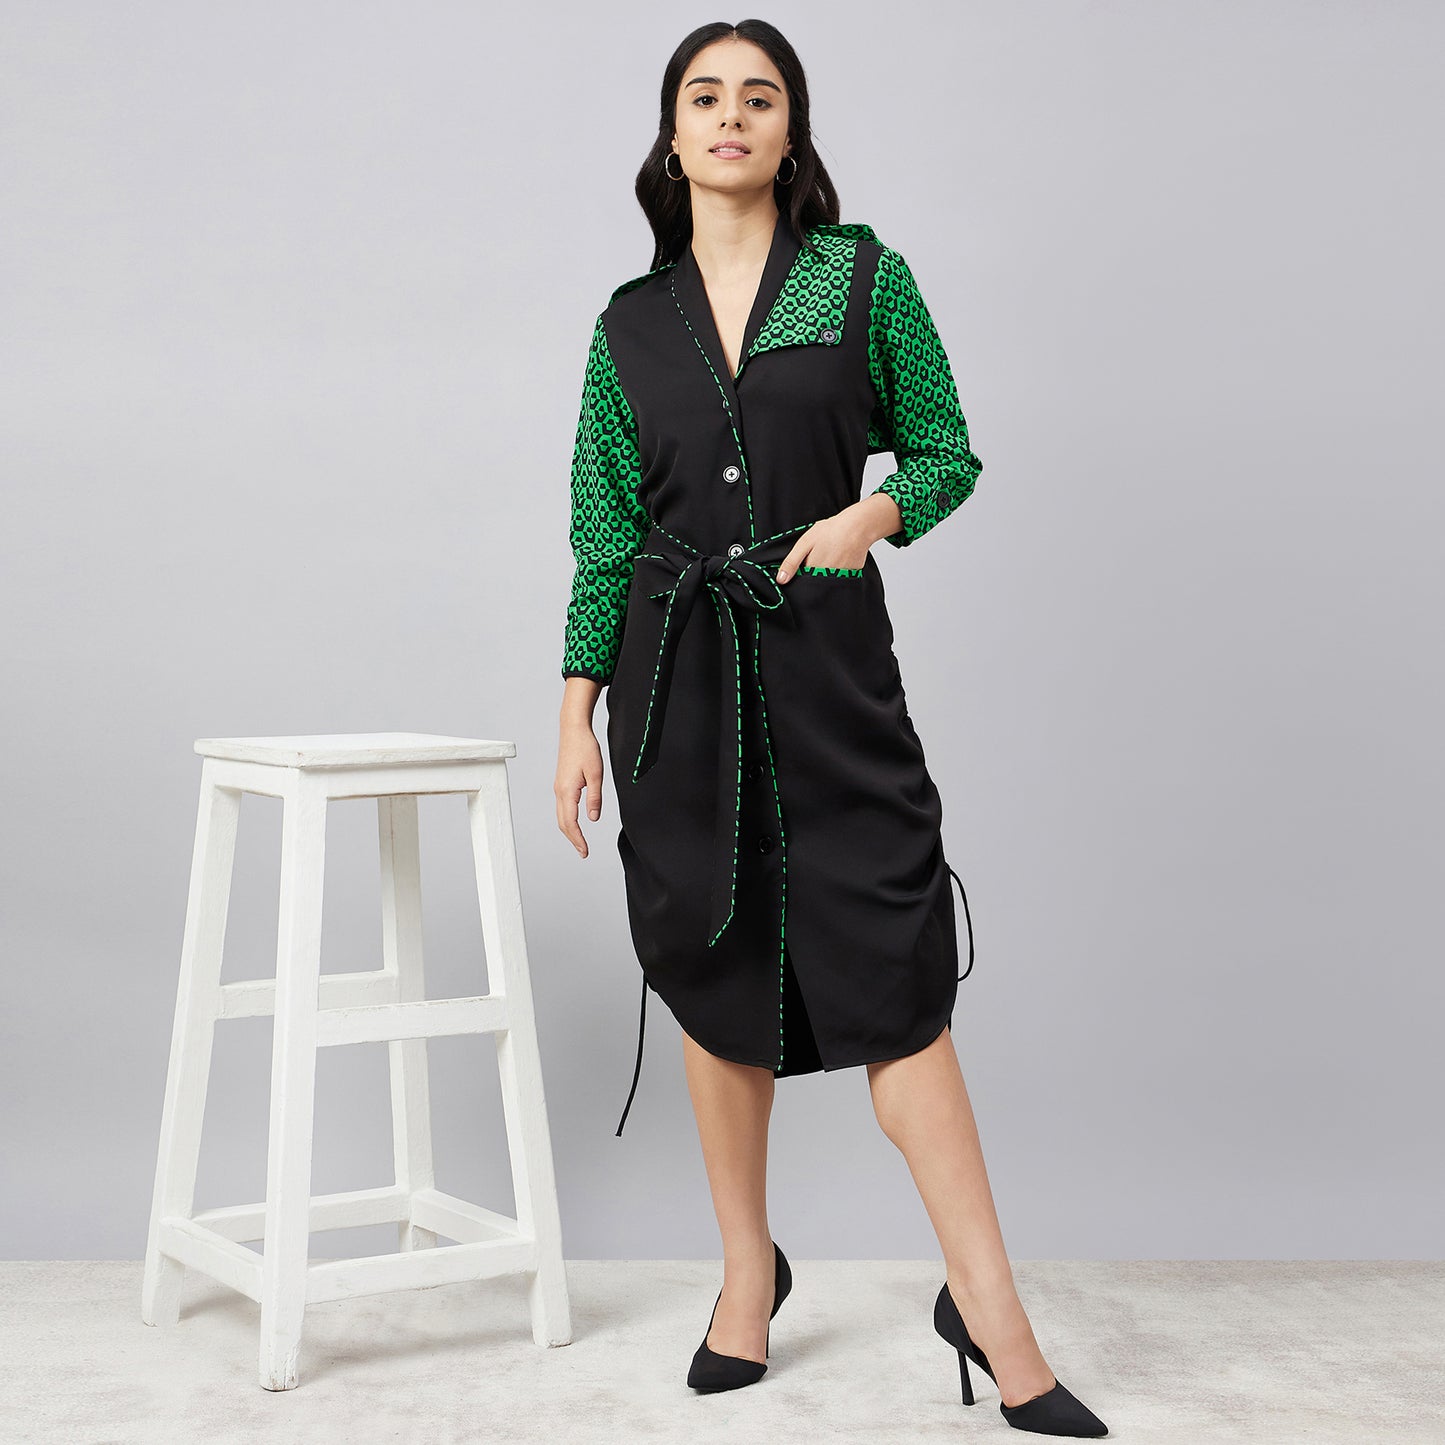 Black and Green Houndstooth Print Shirt Dress with Belt